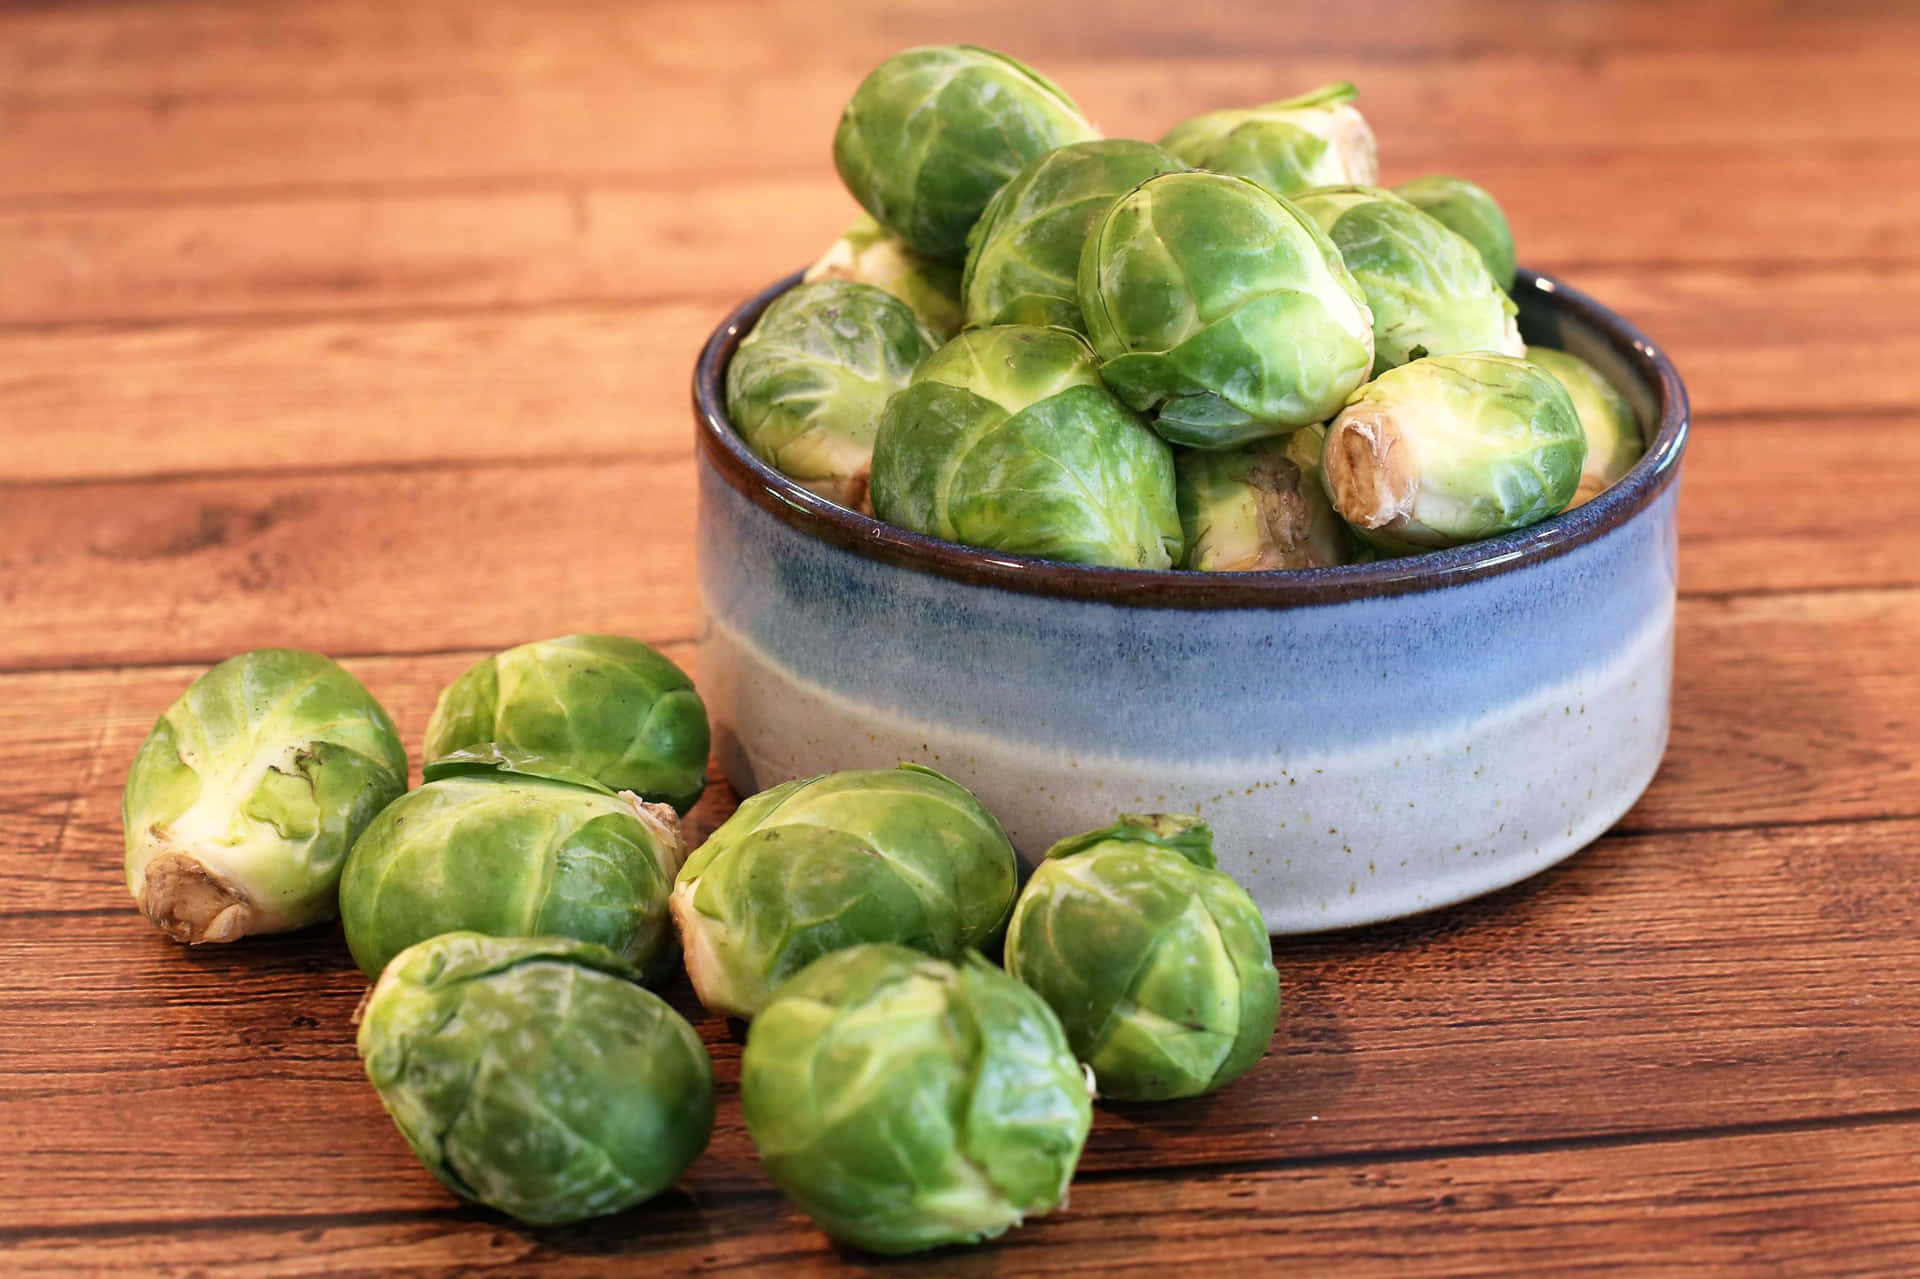 Enjoy the taste of Brussels Sprouts